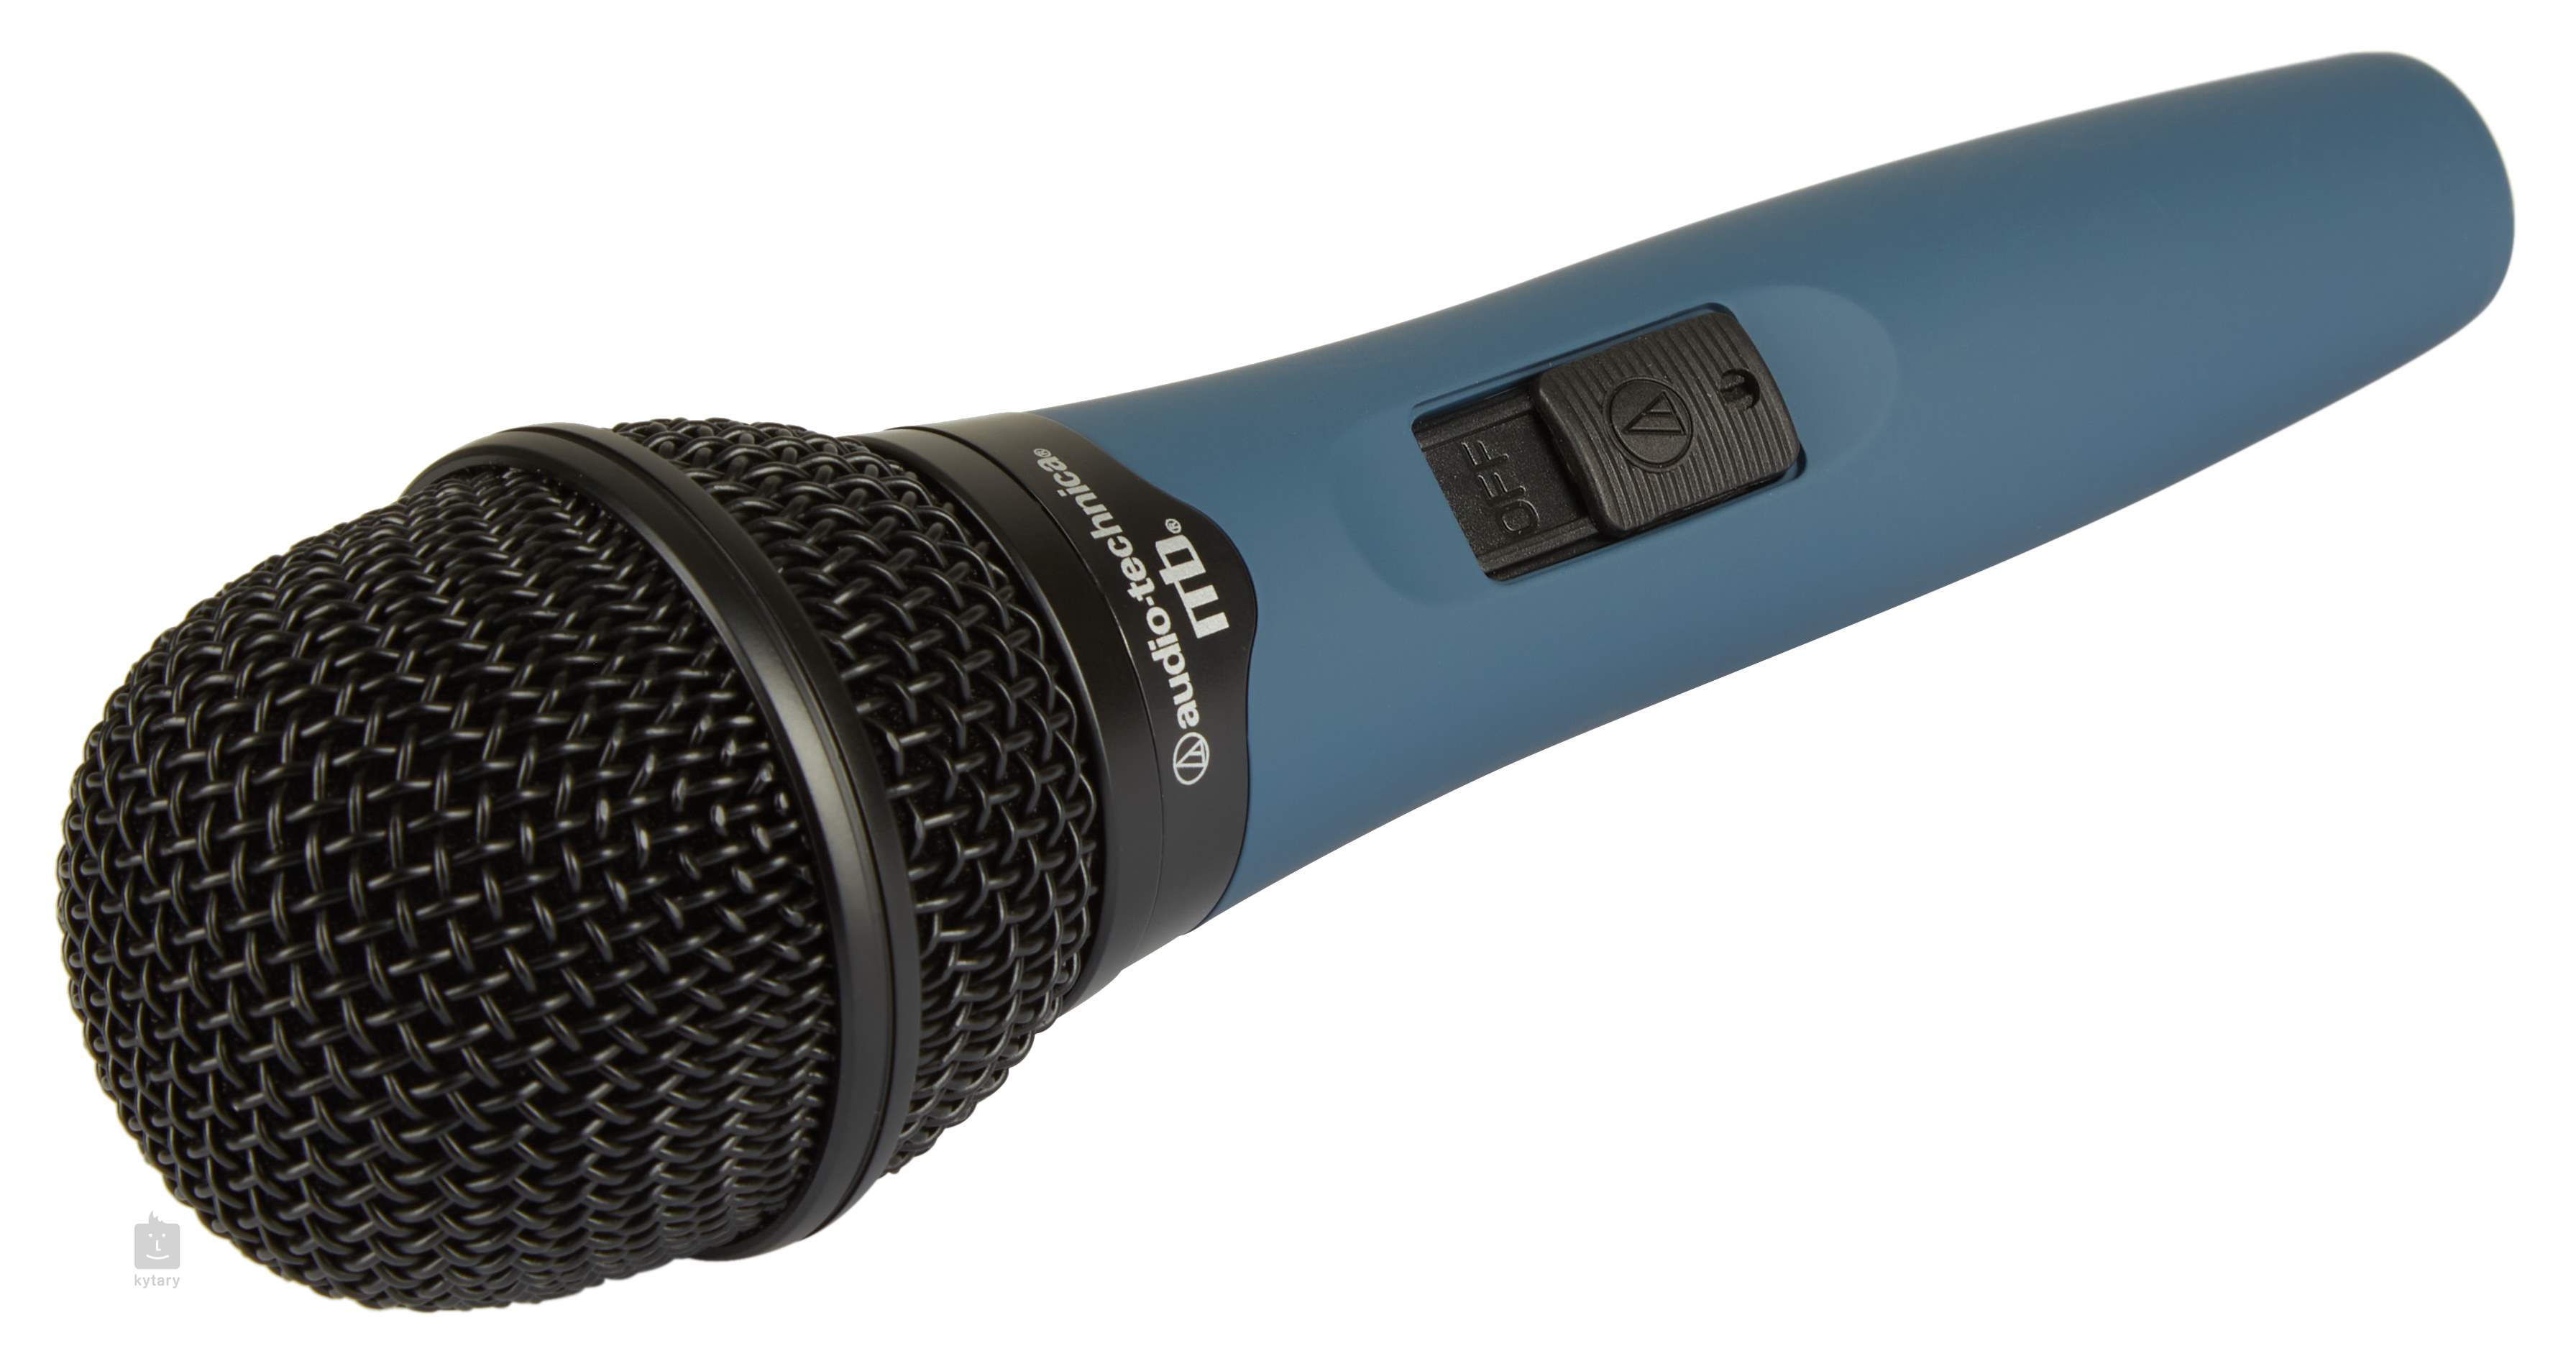 AUDIO-TECHNICA MB3K Dynamic Microphone with Switch